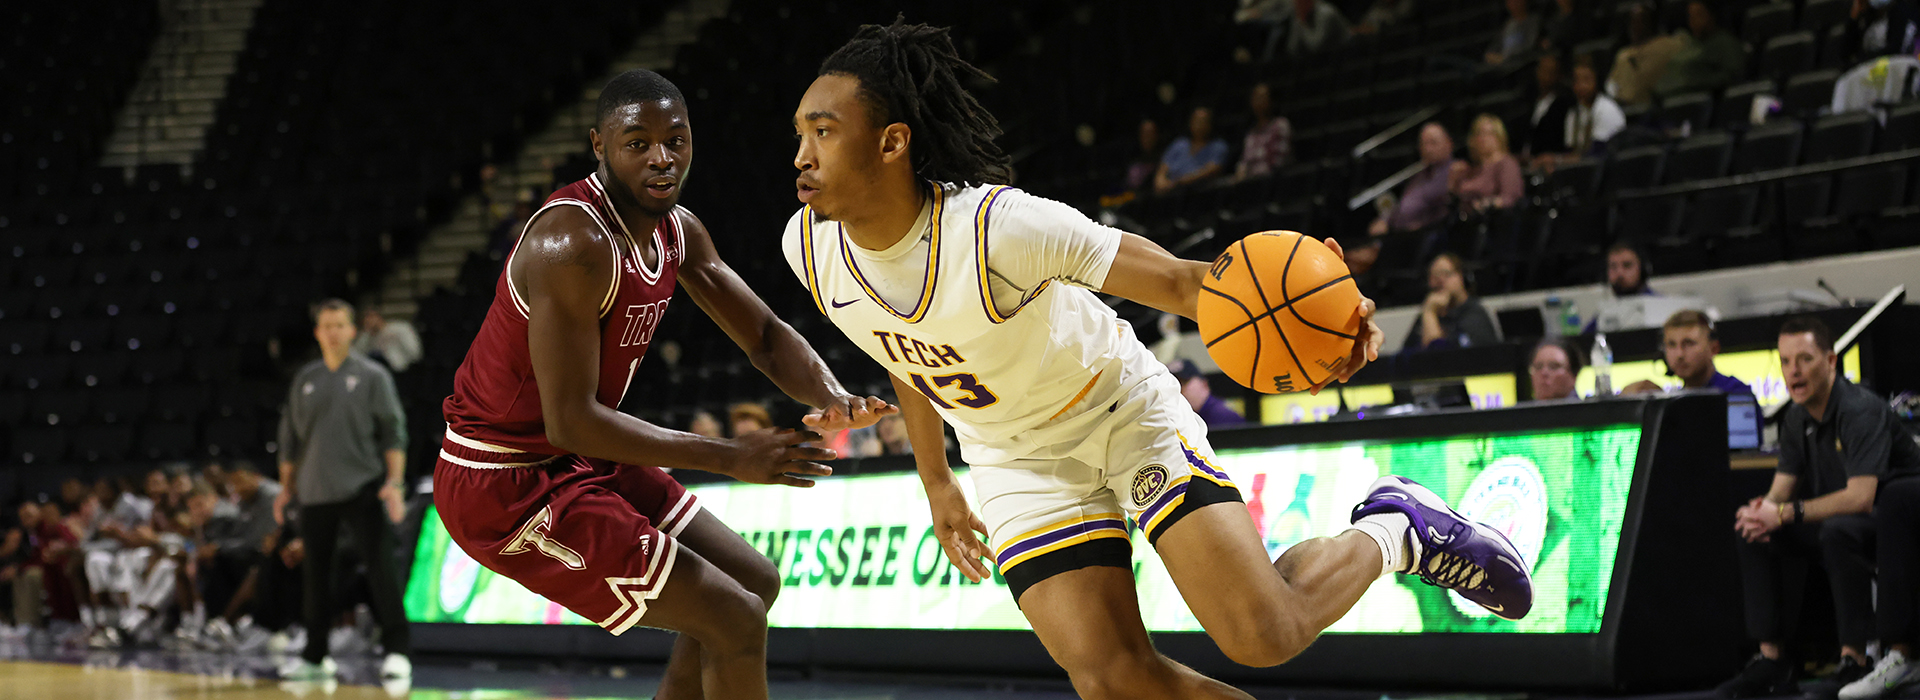 Golden Eagles fall late at Wright State